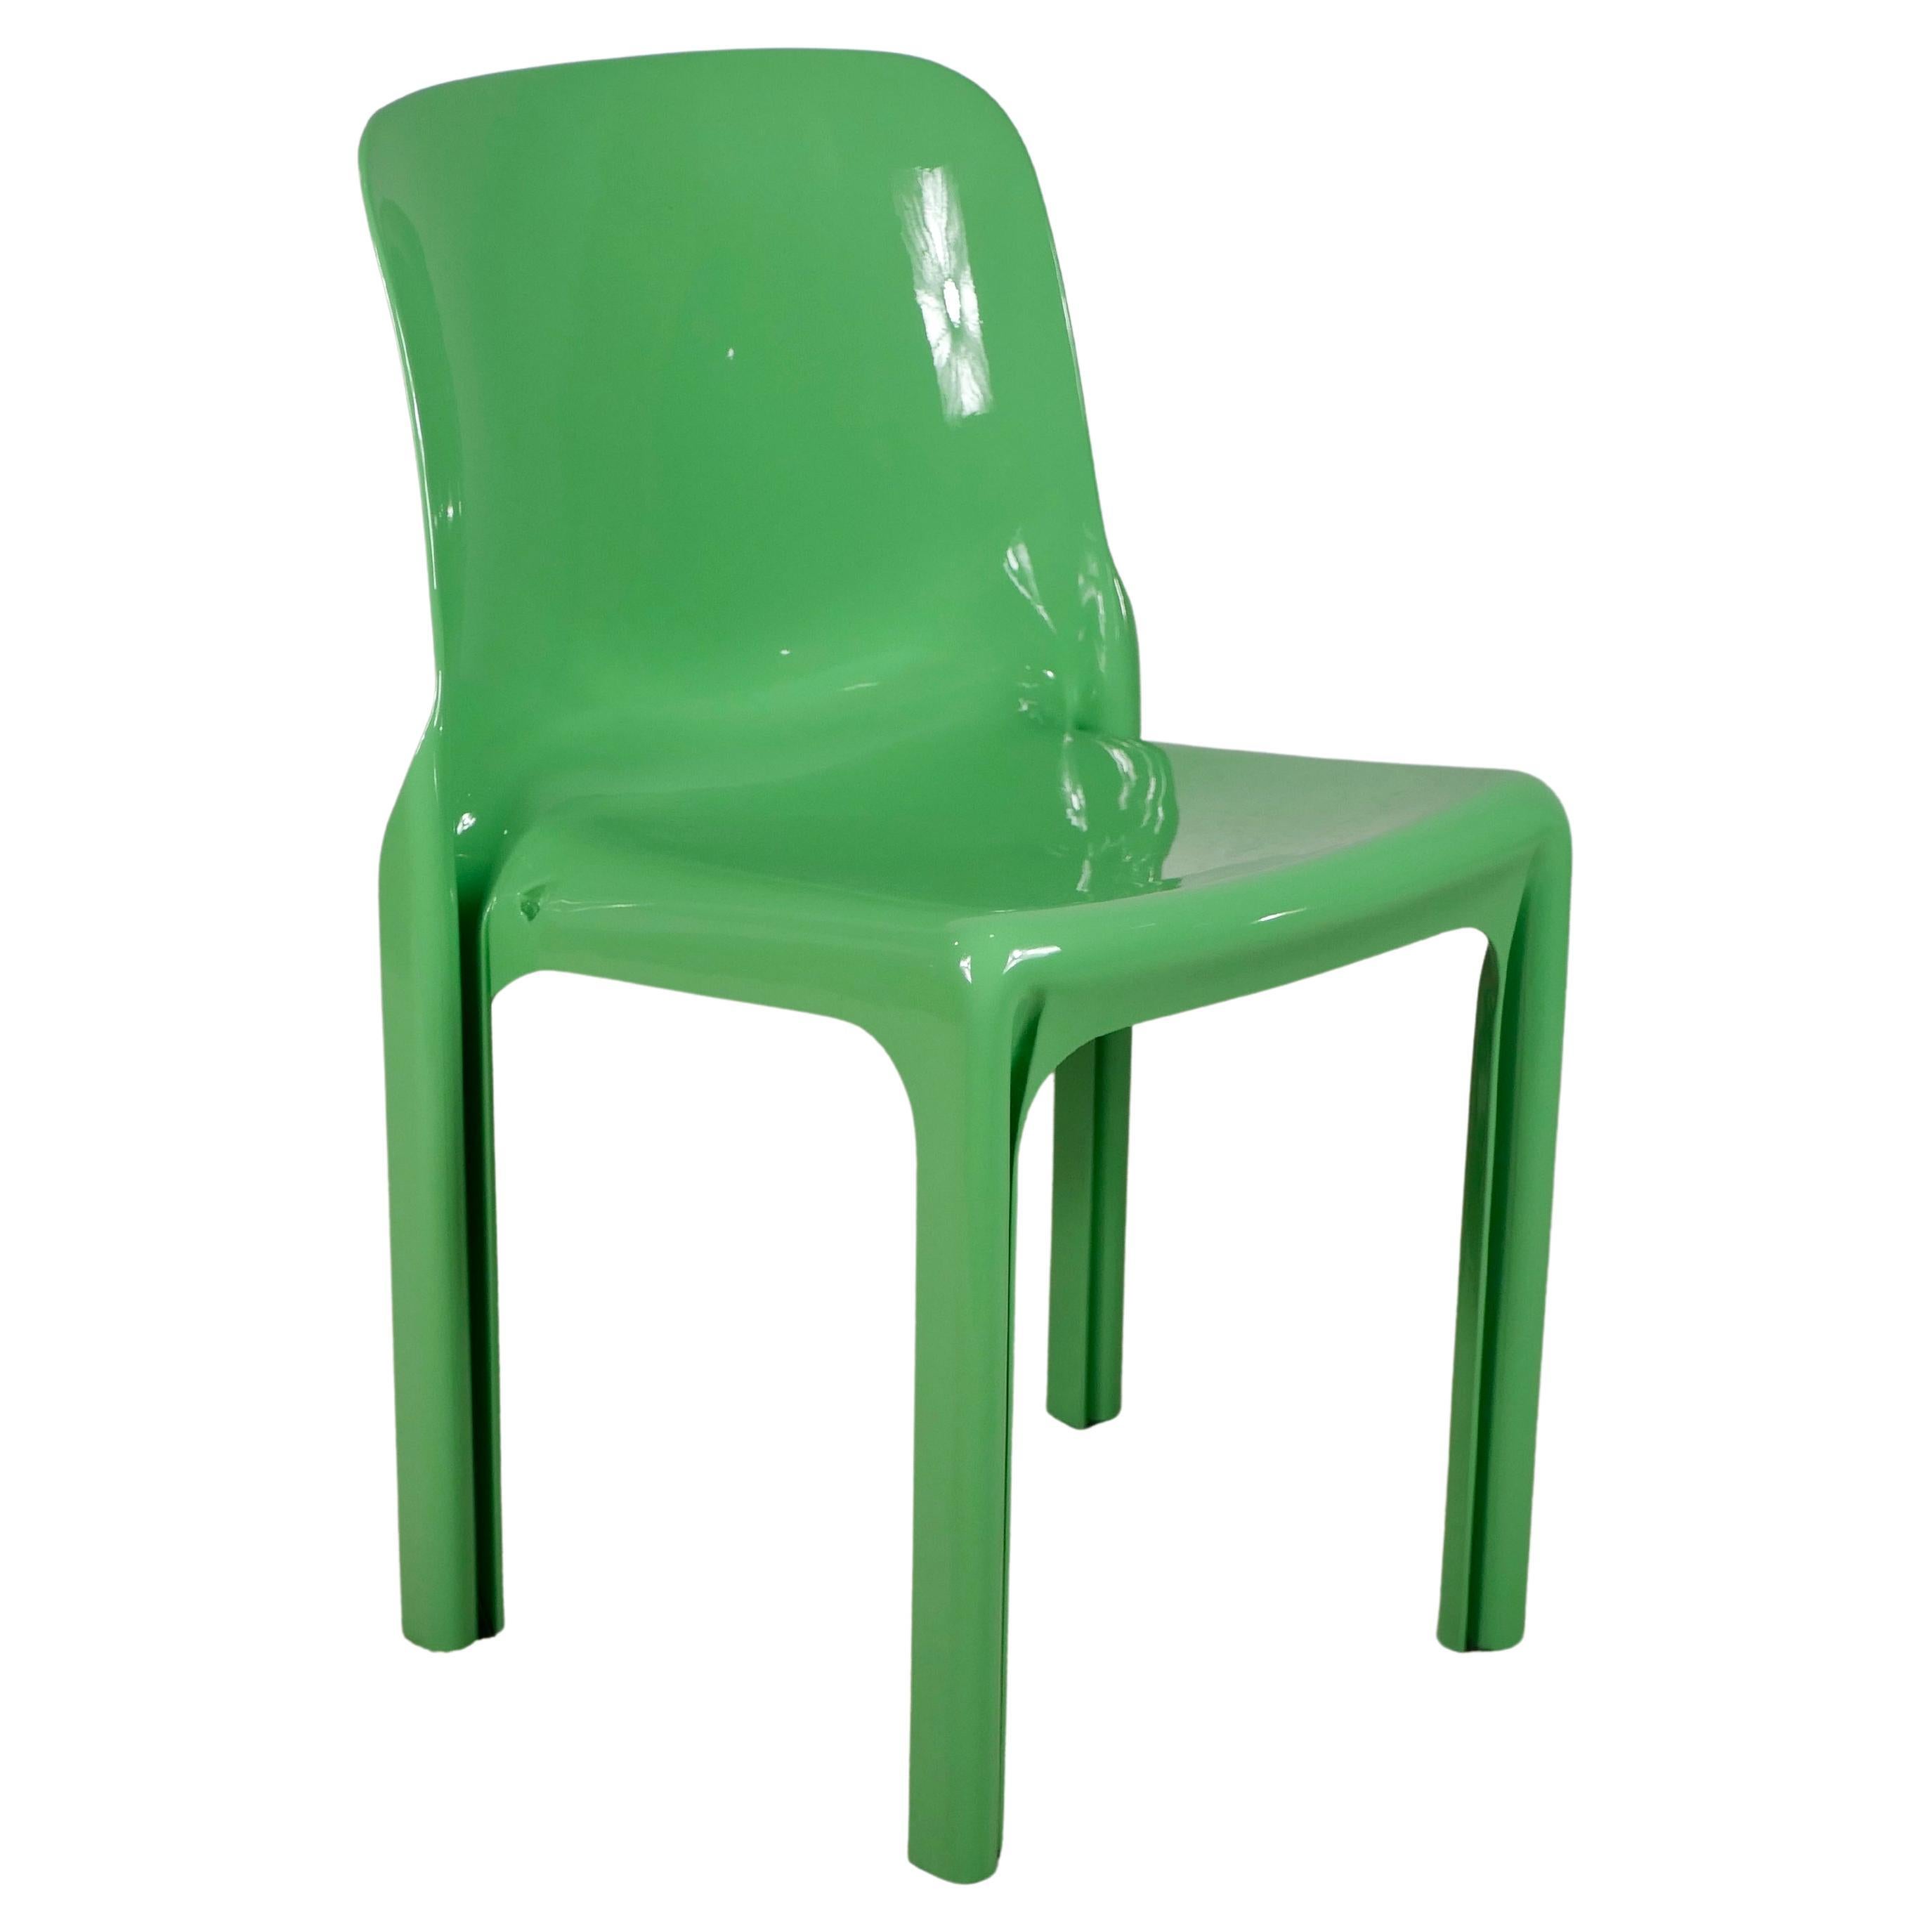 Gorgeous green chairs, Selene model, by Vico Magistretti for Artemide.
Designed in 1966 by the Italian master, the Selene is a stackable and lightweight chair, with S-shaped foot which give sturdiness and stability without adding Material